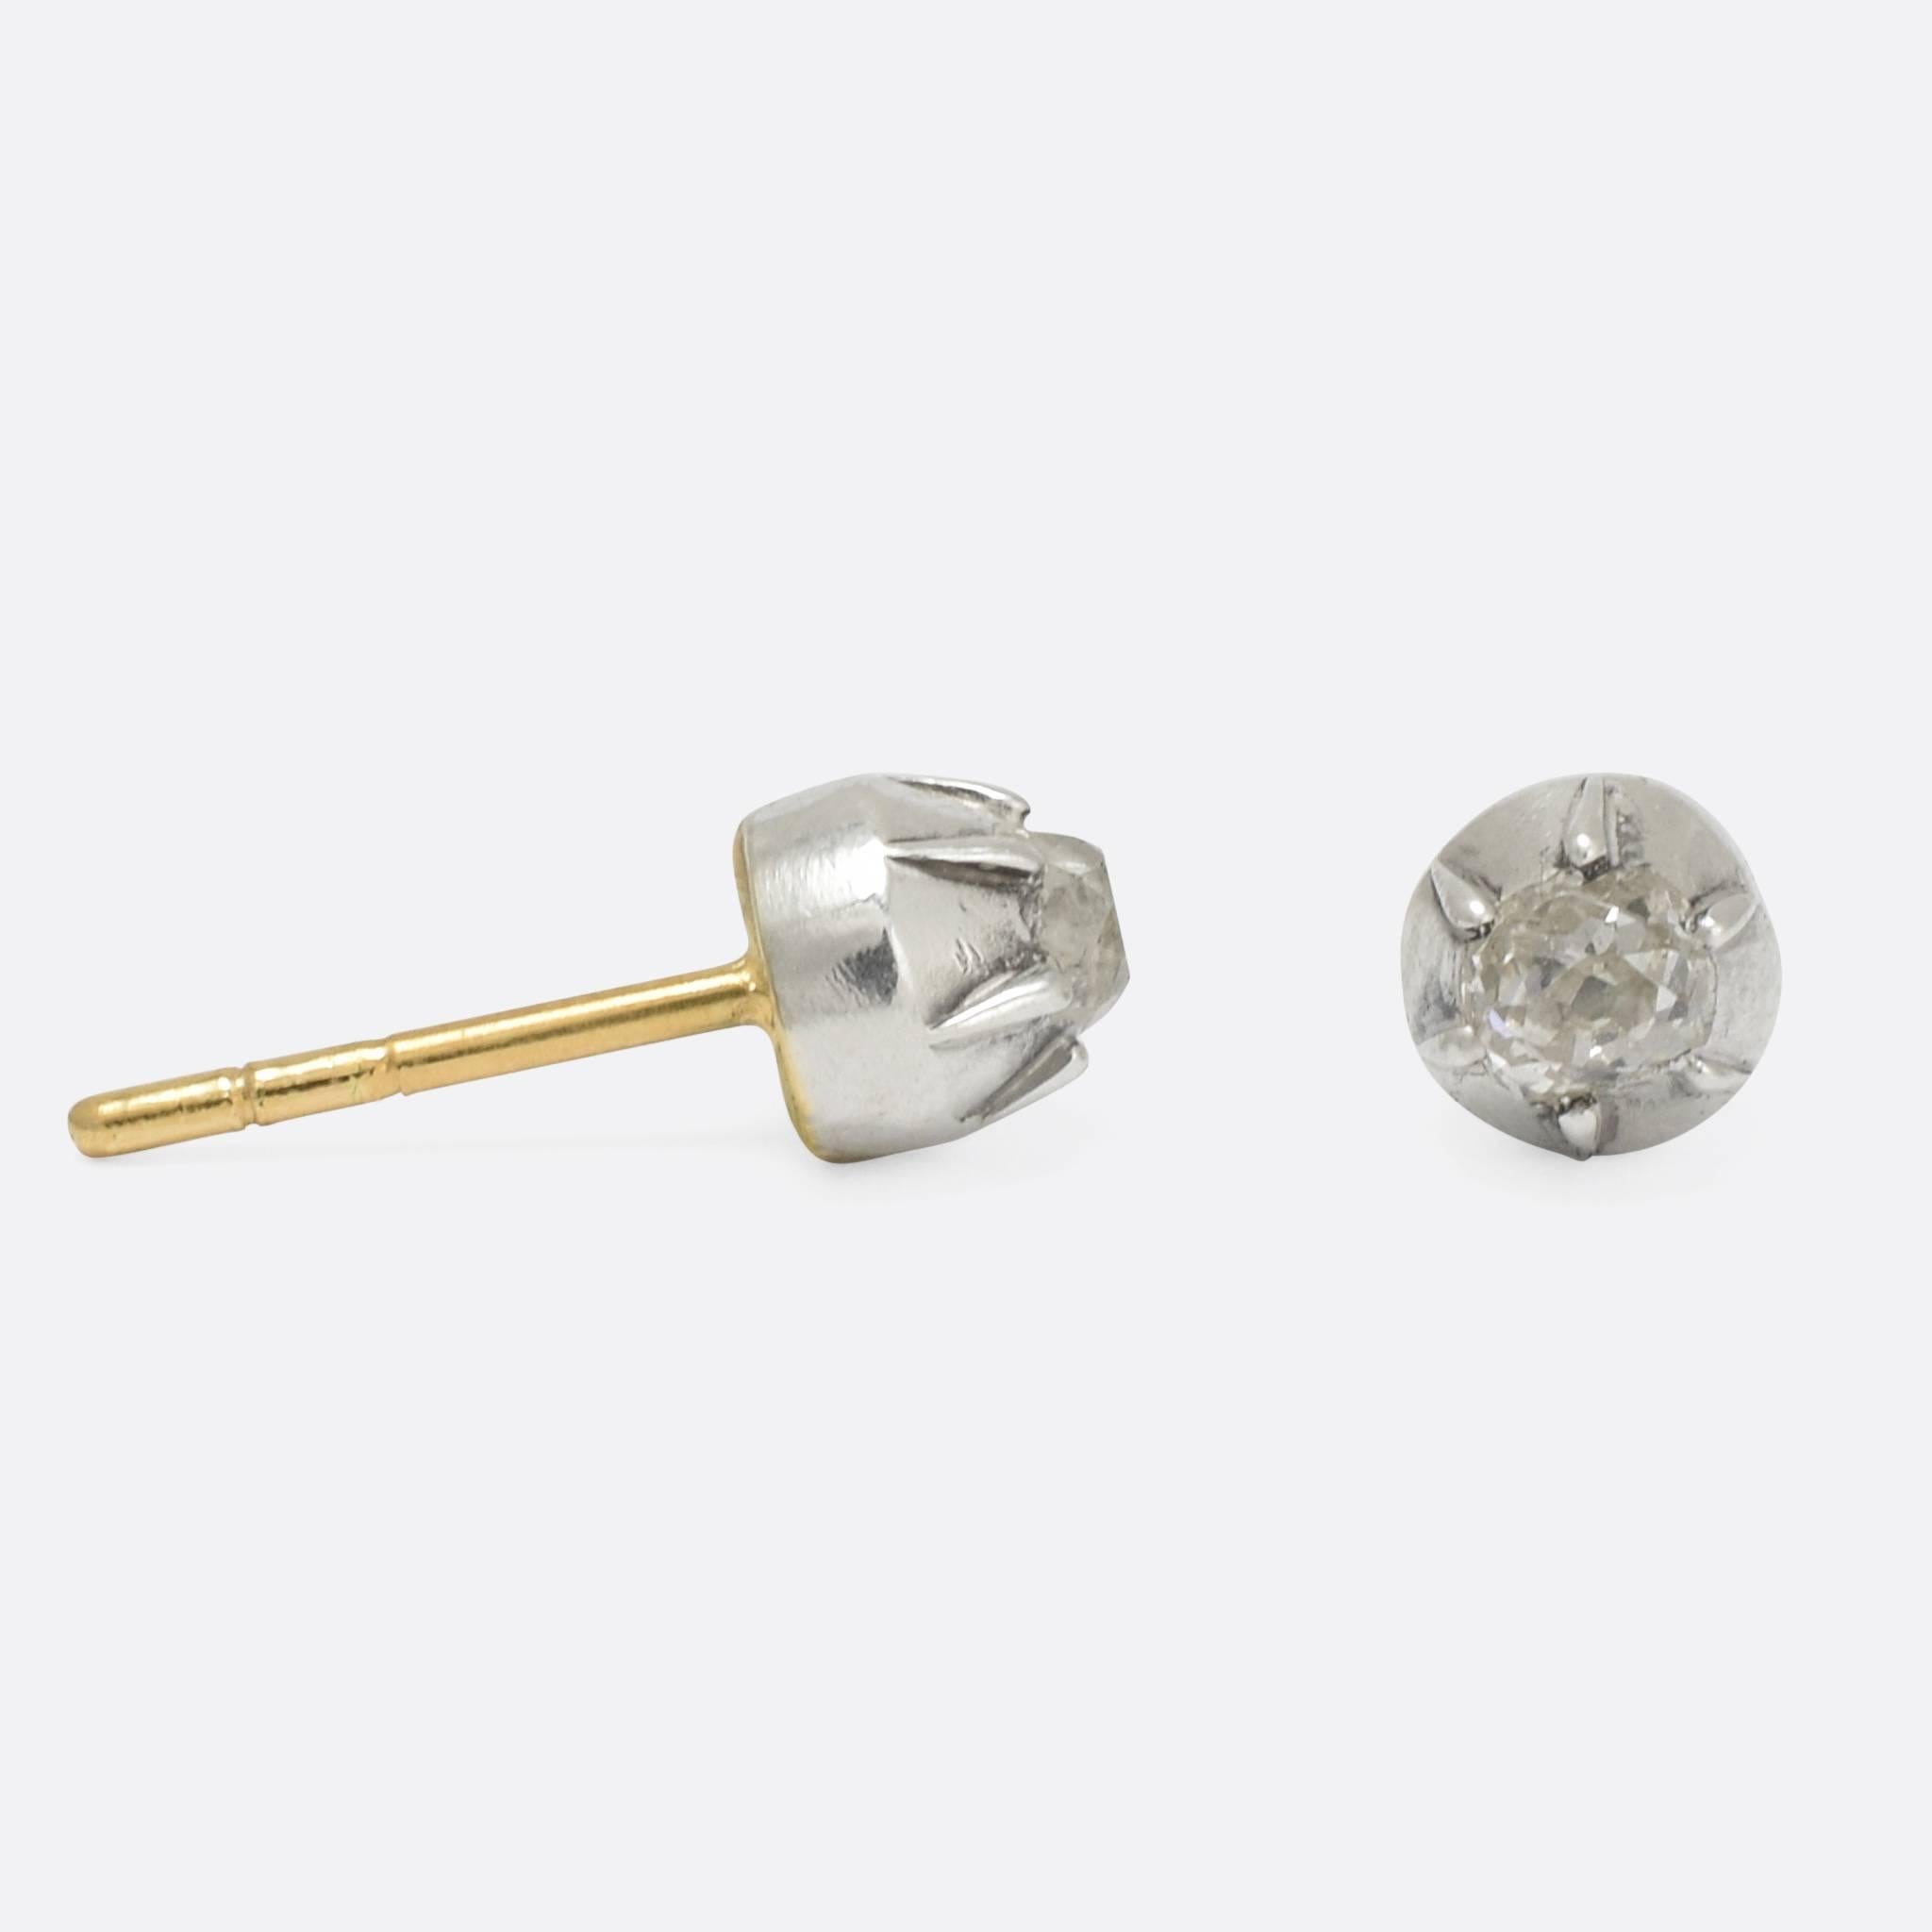 A sweet pair of Georgian stud earring conversions, each set with a .15ct old mine cut diamond in silver claw settings typical of the period. We have added 9k gold posts with butterfly backs. They were originally part of a larger Georgian era brooch.